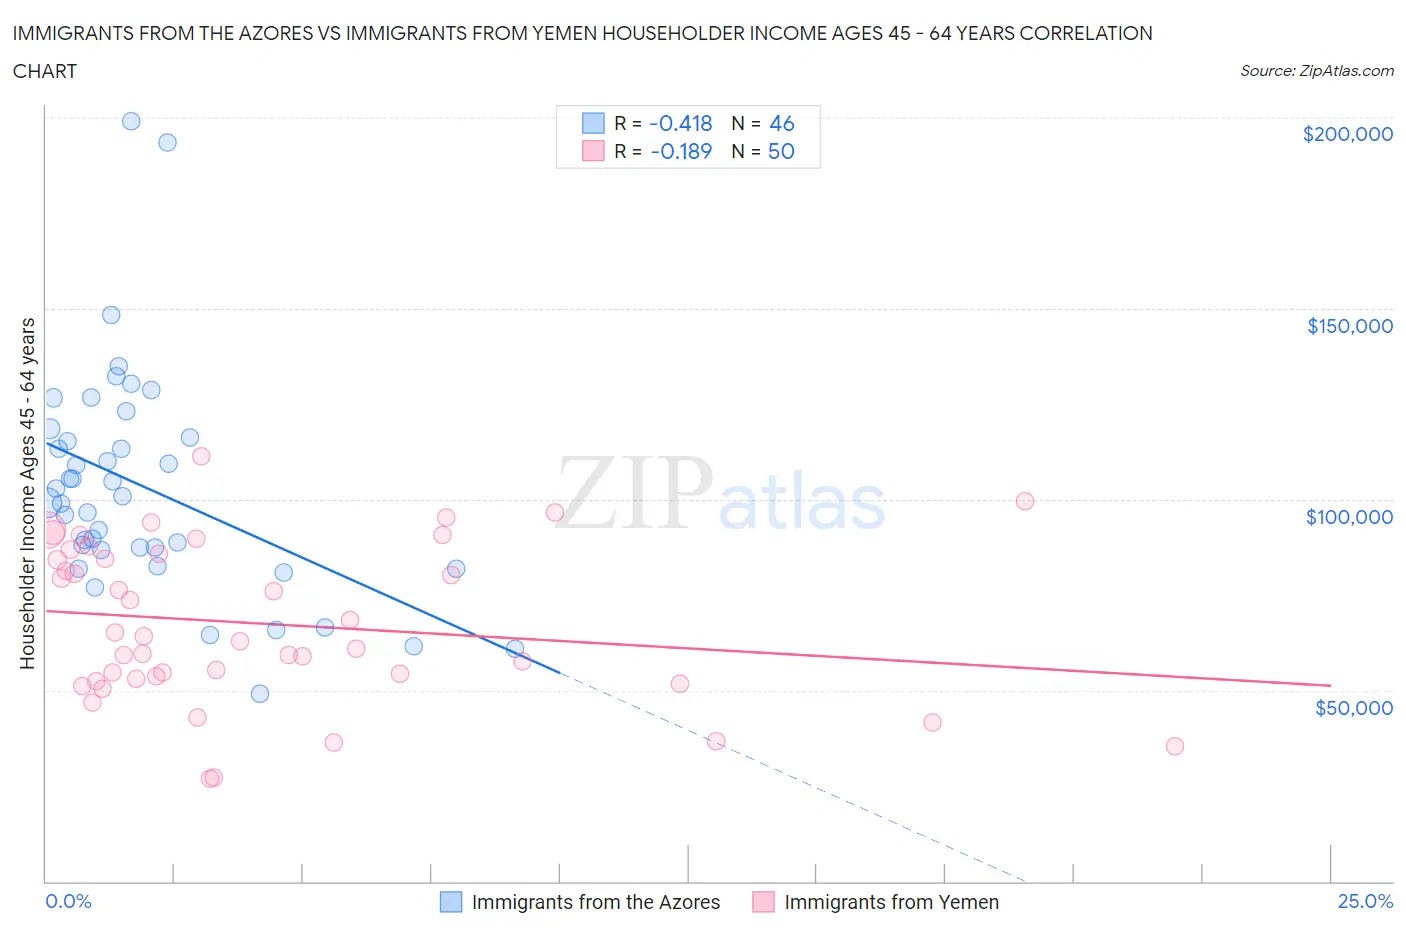 Immigrants from the Azores vs Immigrants from Yemen Householder Income Ages 45 - 64 years